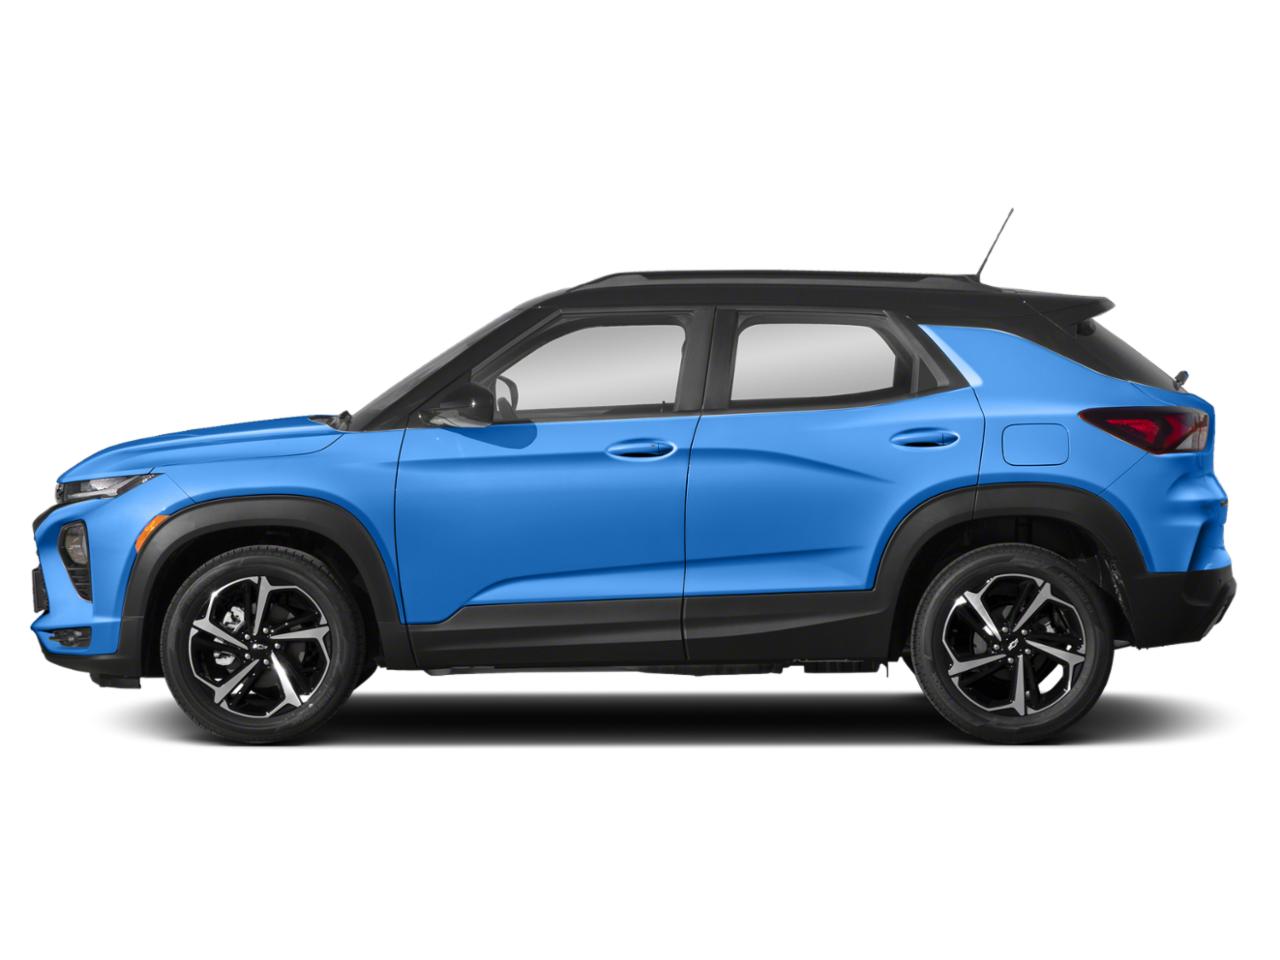 New 2023 Chevrolet Trailblazer FWD 4dr RS in Blue for sale in SAINT